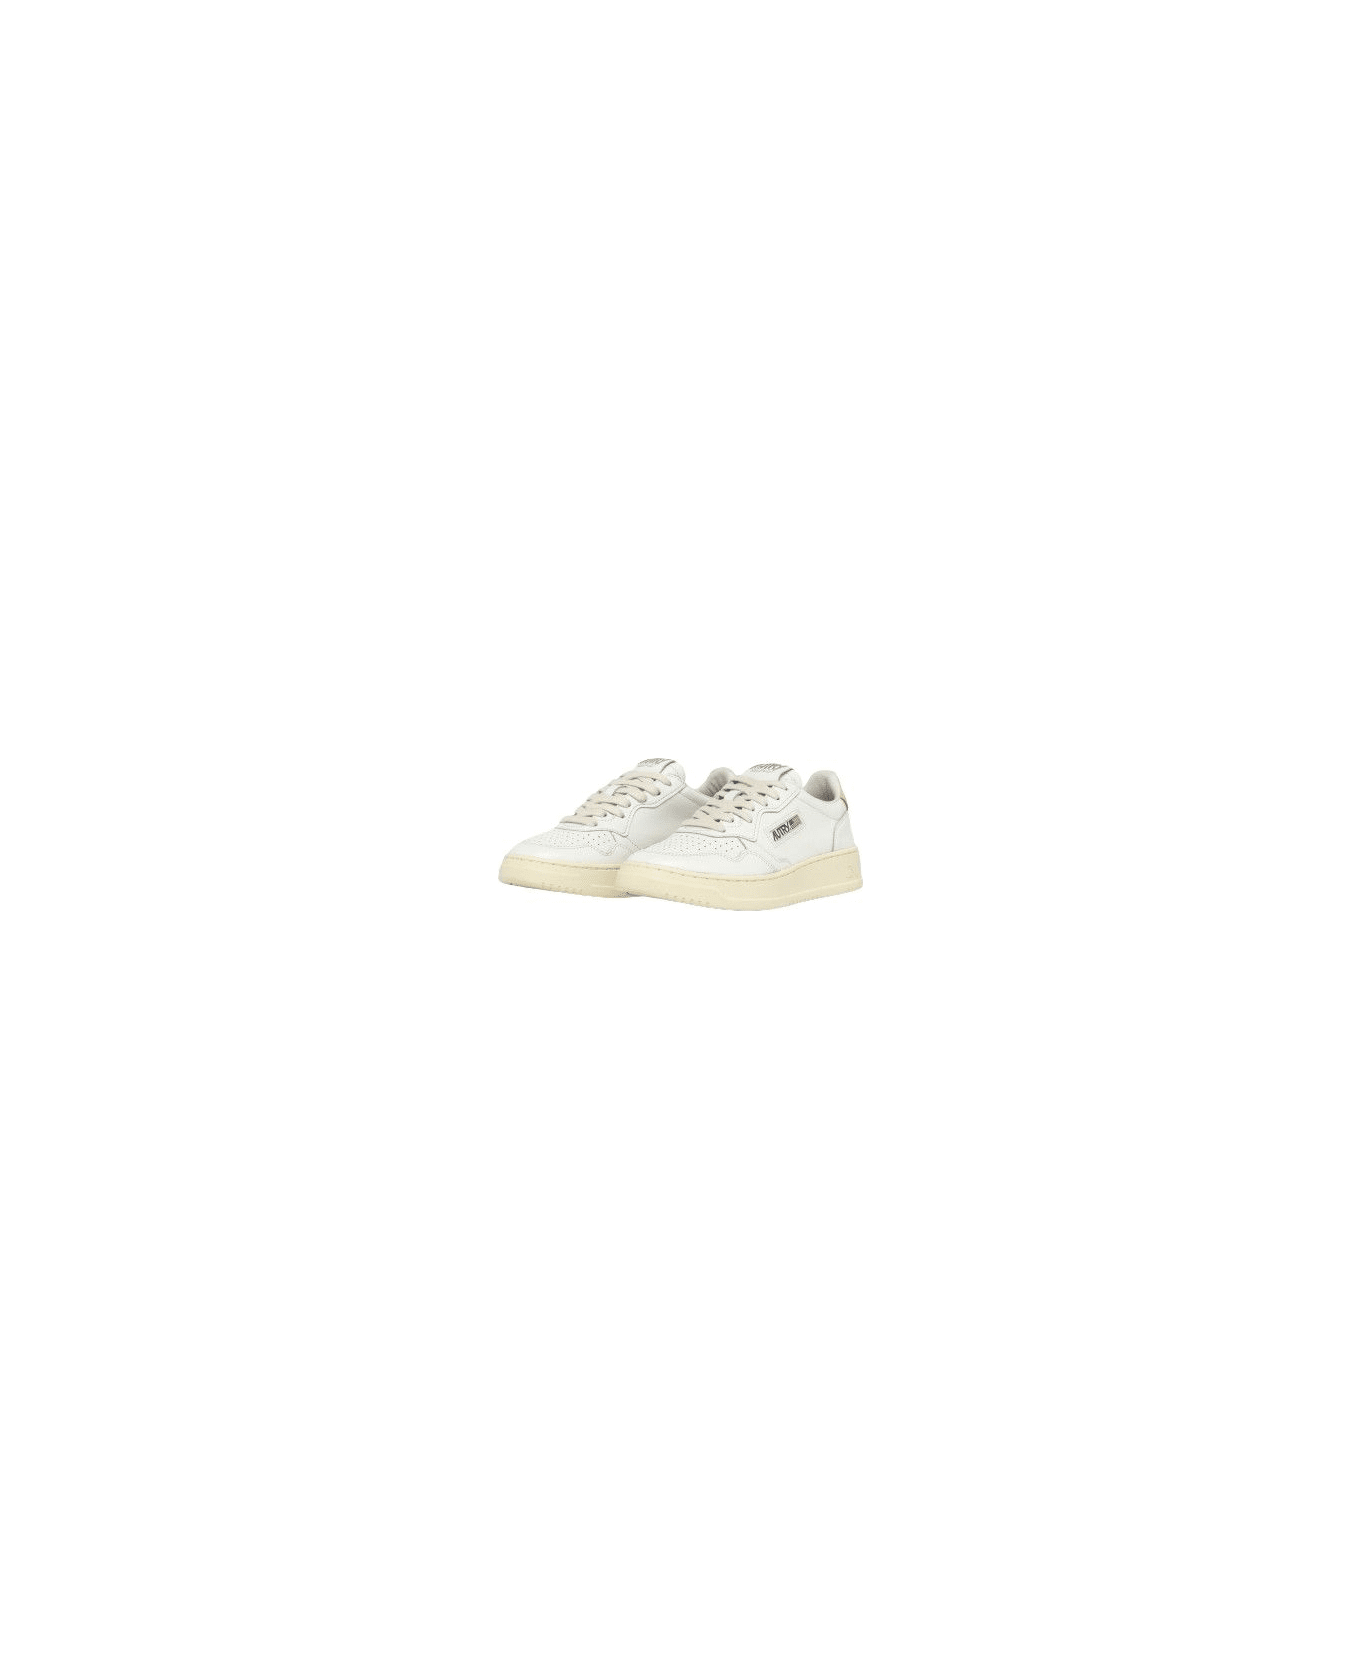 Autry Medalist Low Sneakers - White